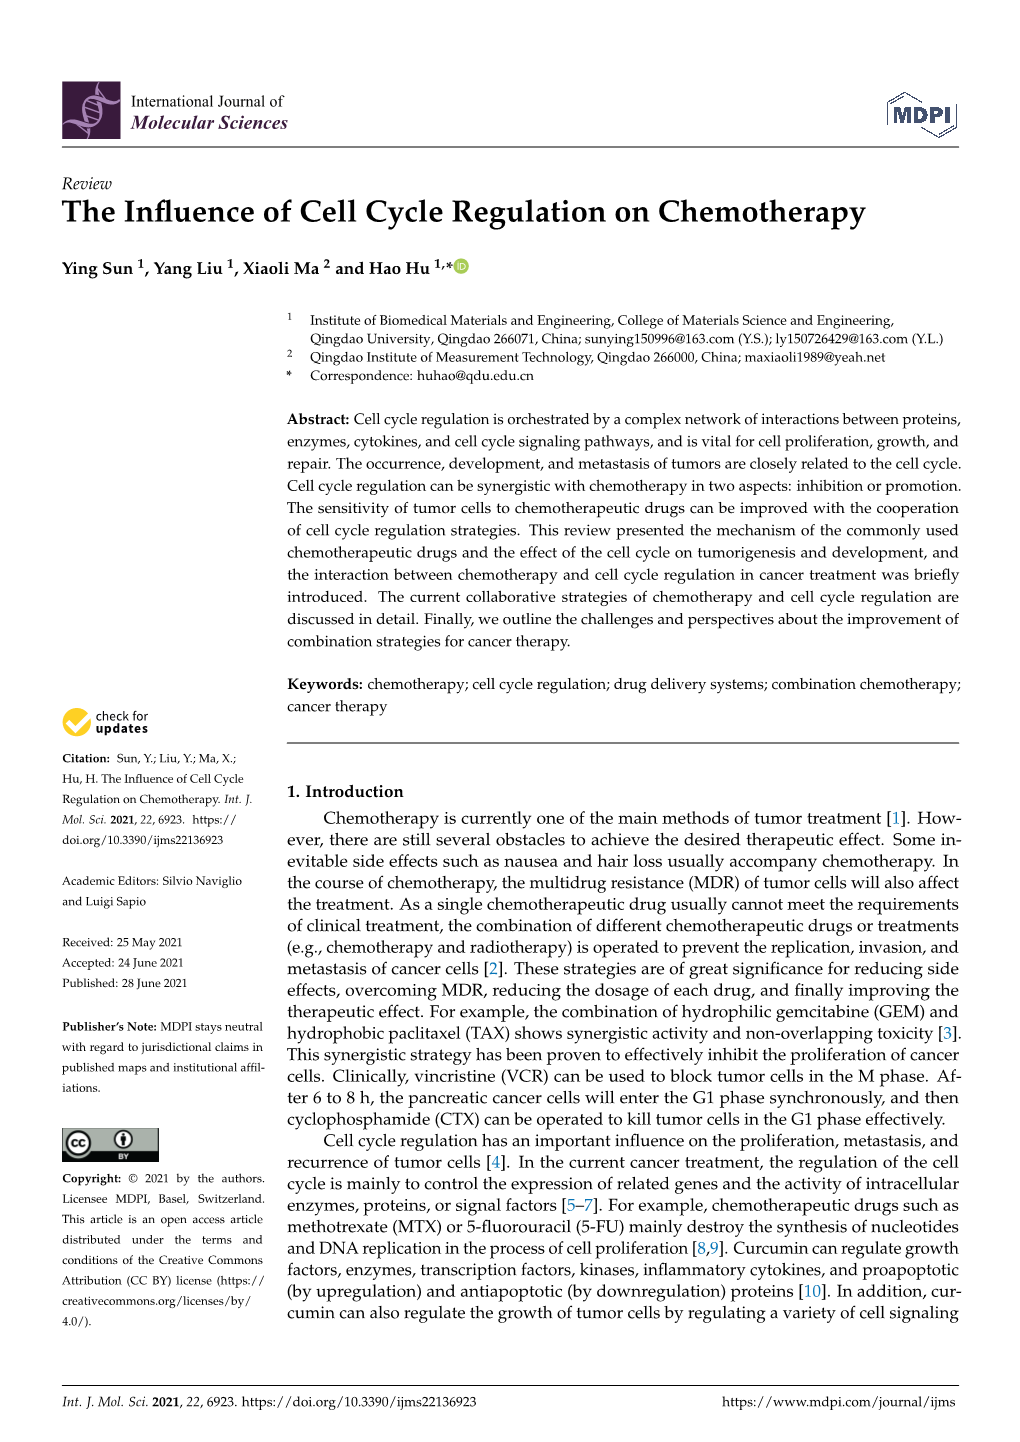 The Influence of Cell Cycle Regulation on Chemotherapy